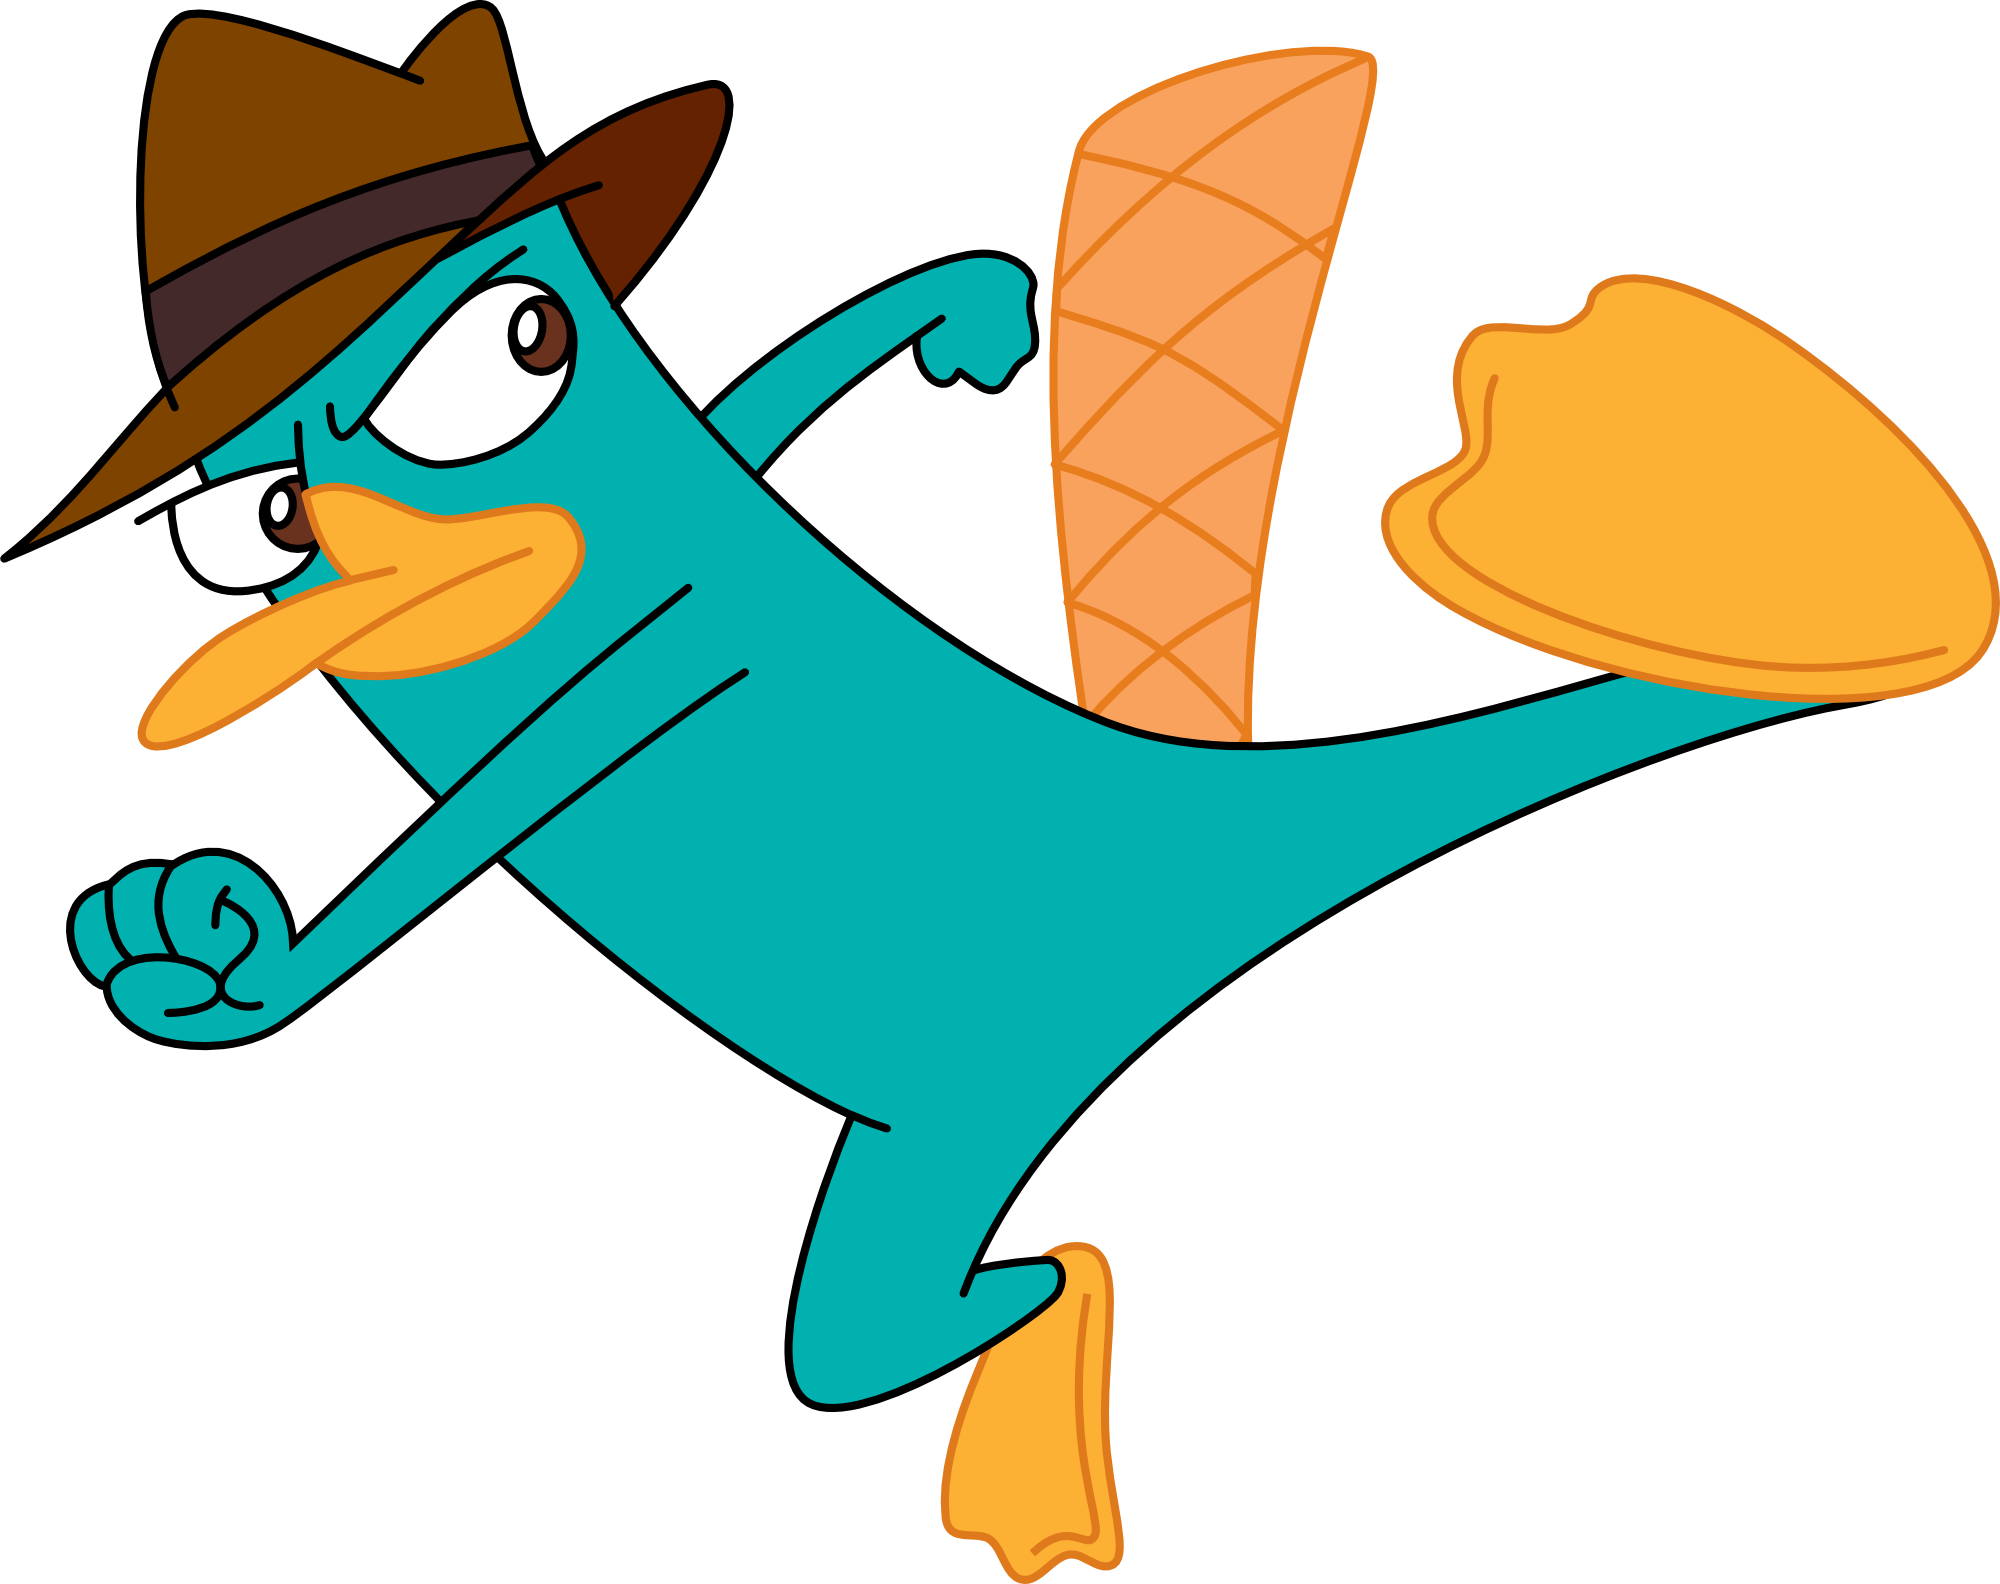 perry-the-platypus-vs-battles-wiki-fandom-powered-by-wikia